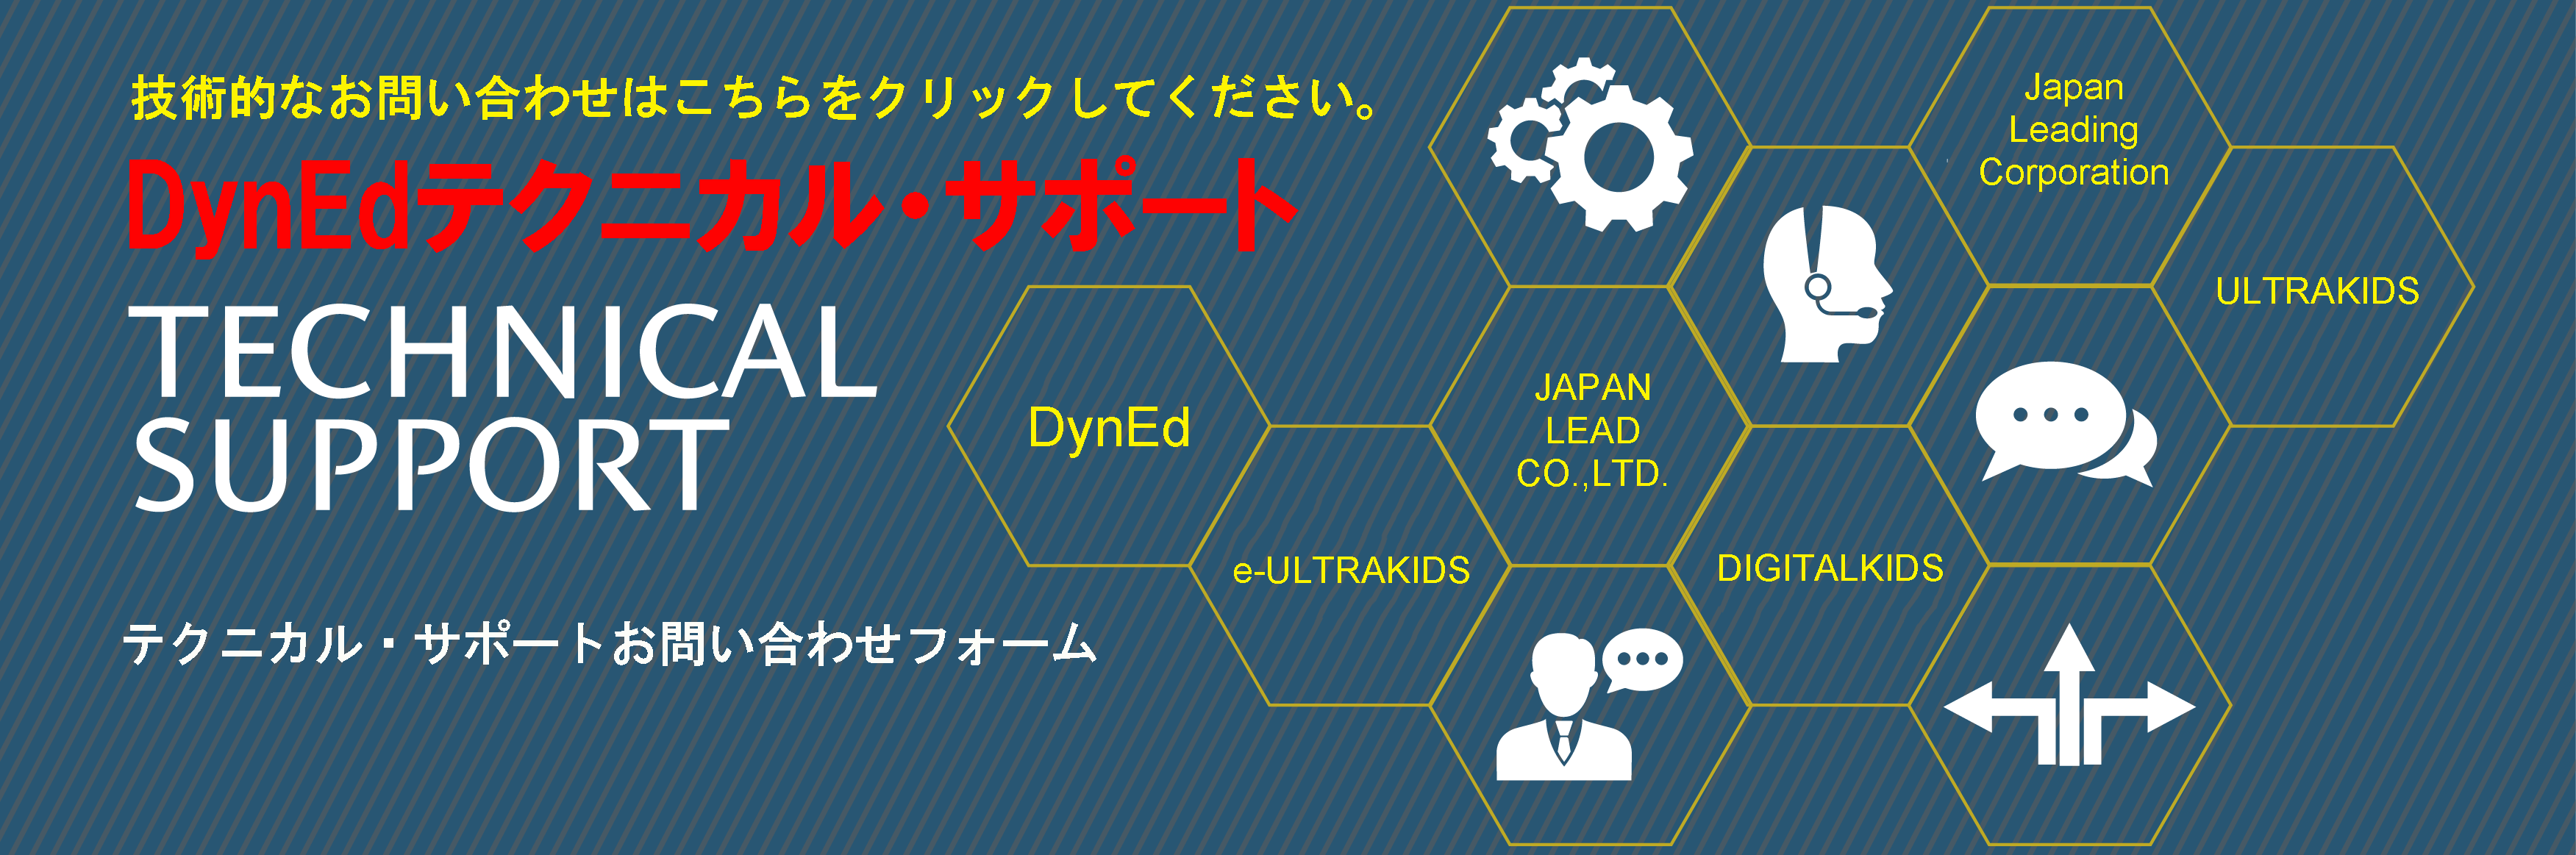 DynEd Technical Support Link